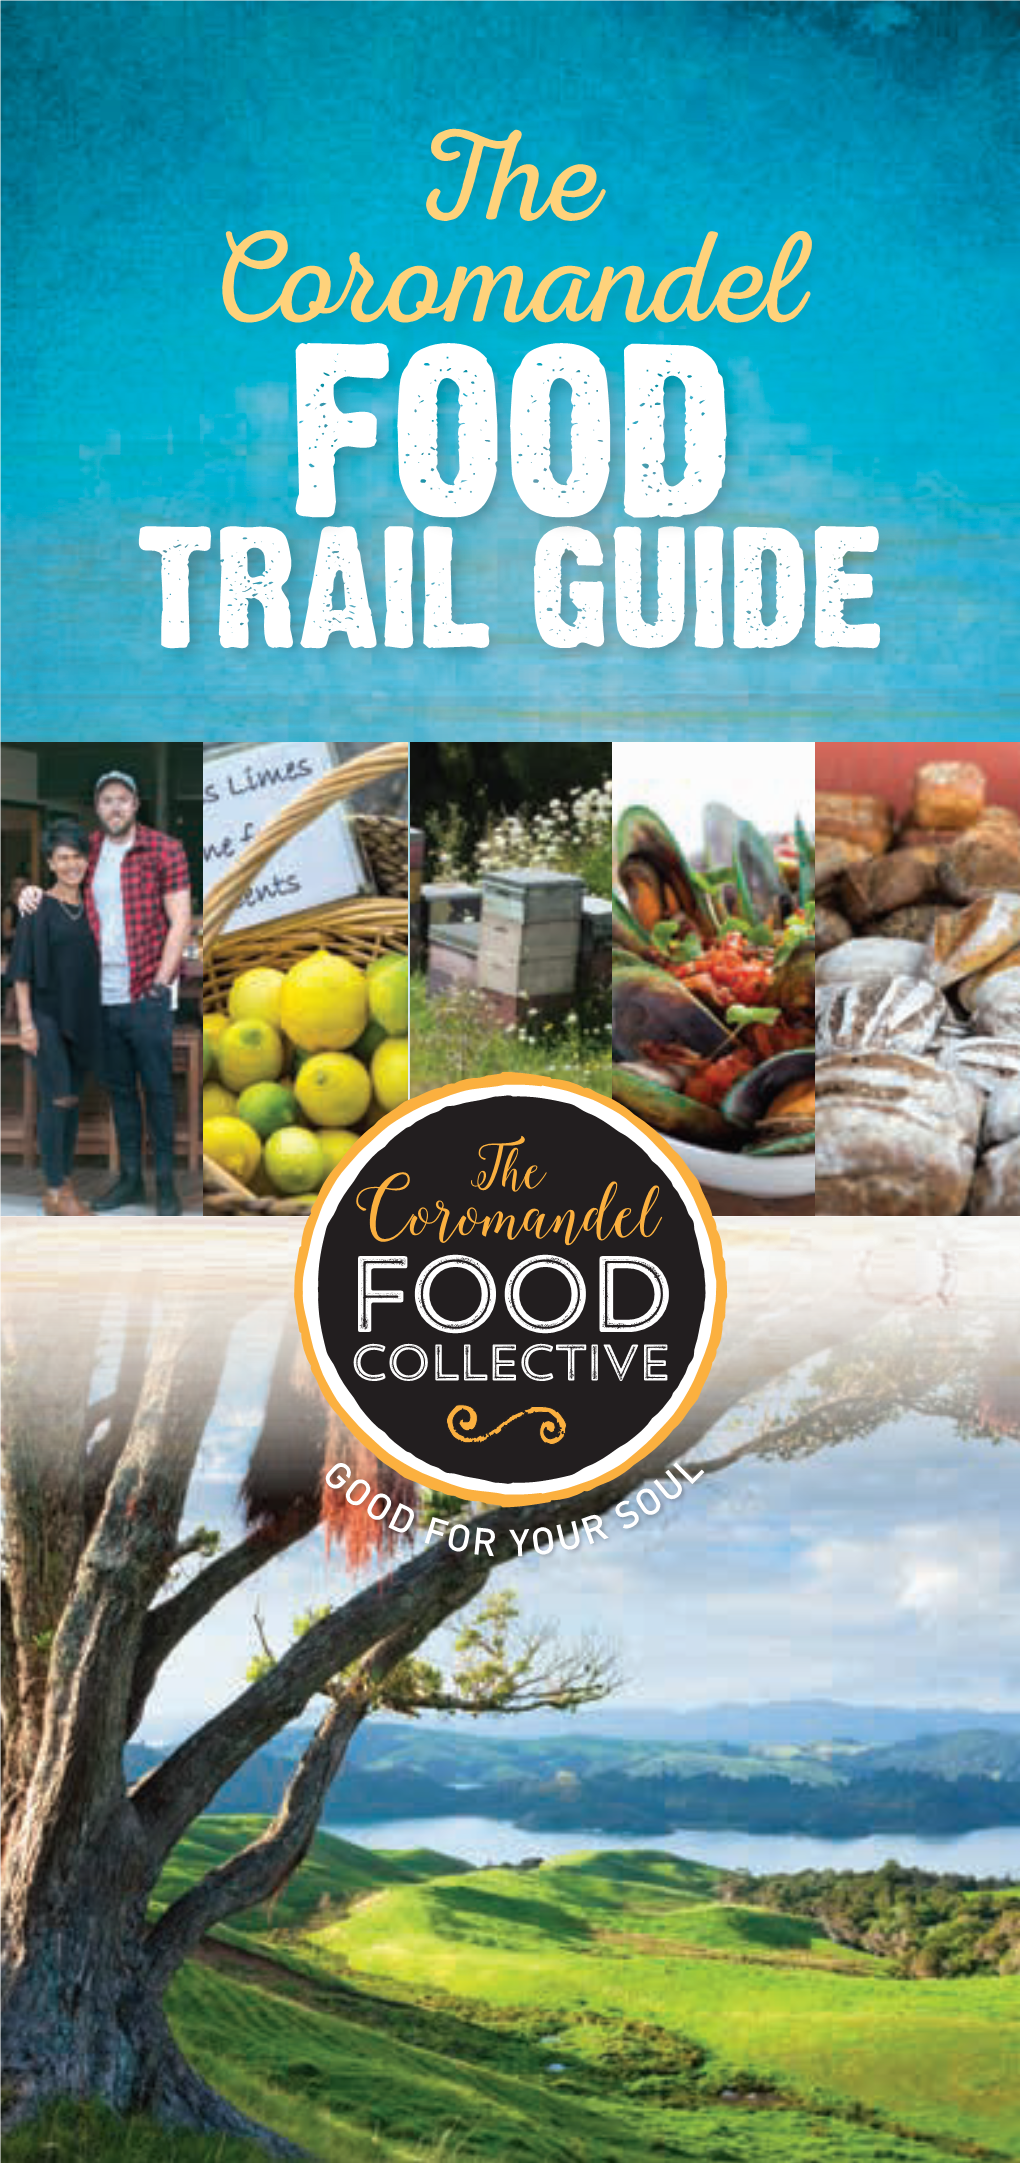 TCDC Food Trail Brochure Discover More Food Vendors, Producers And